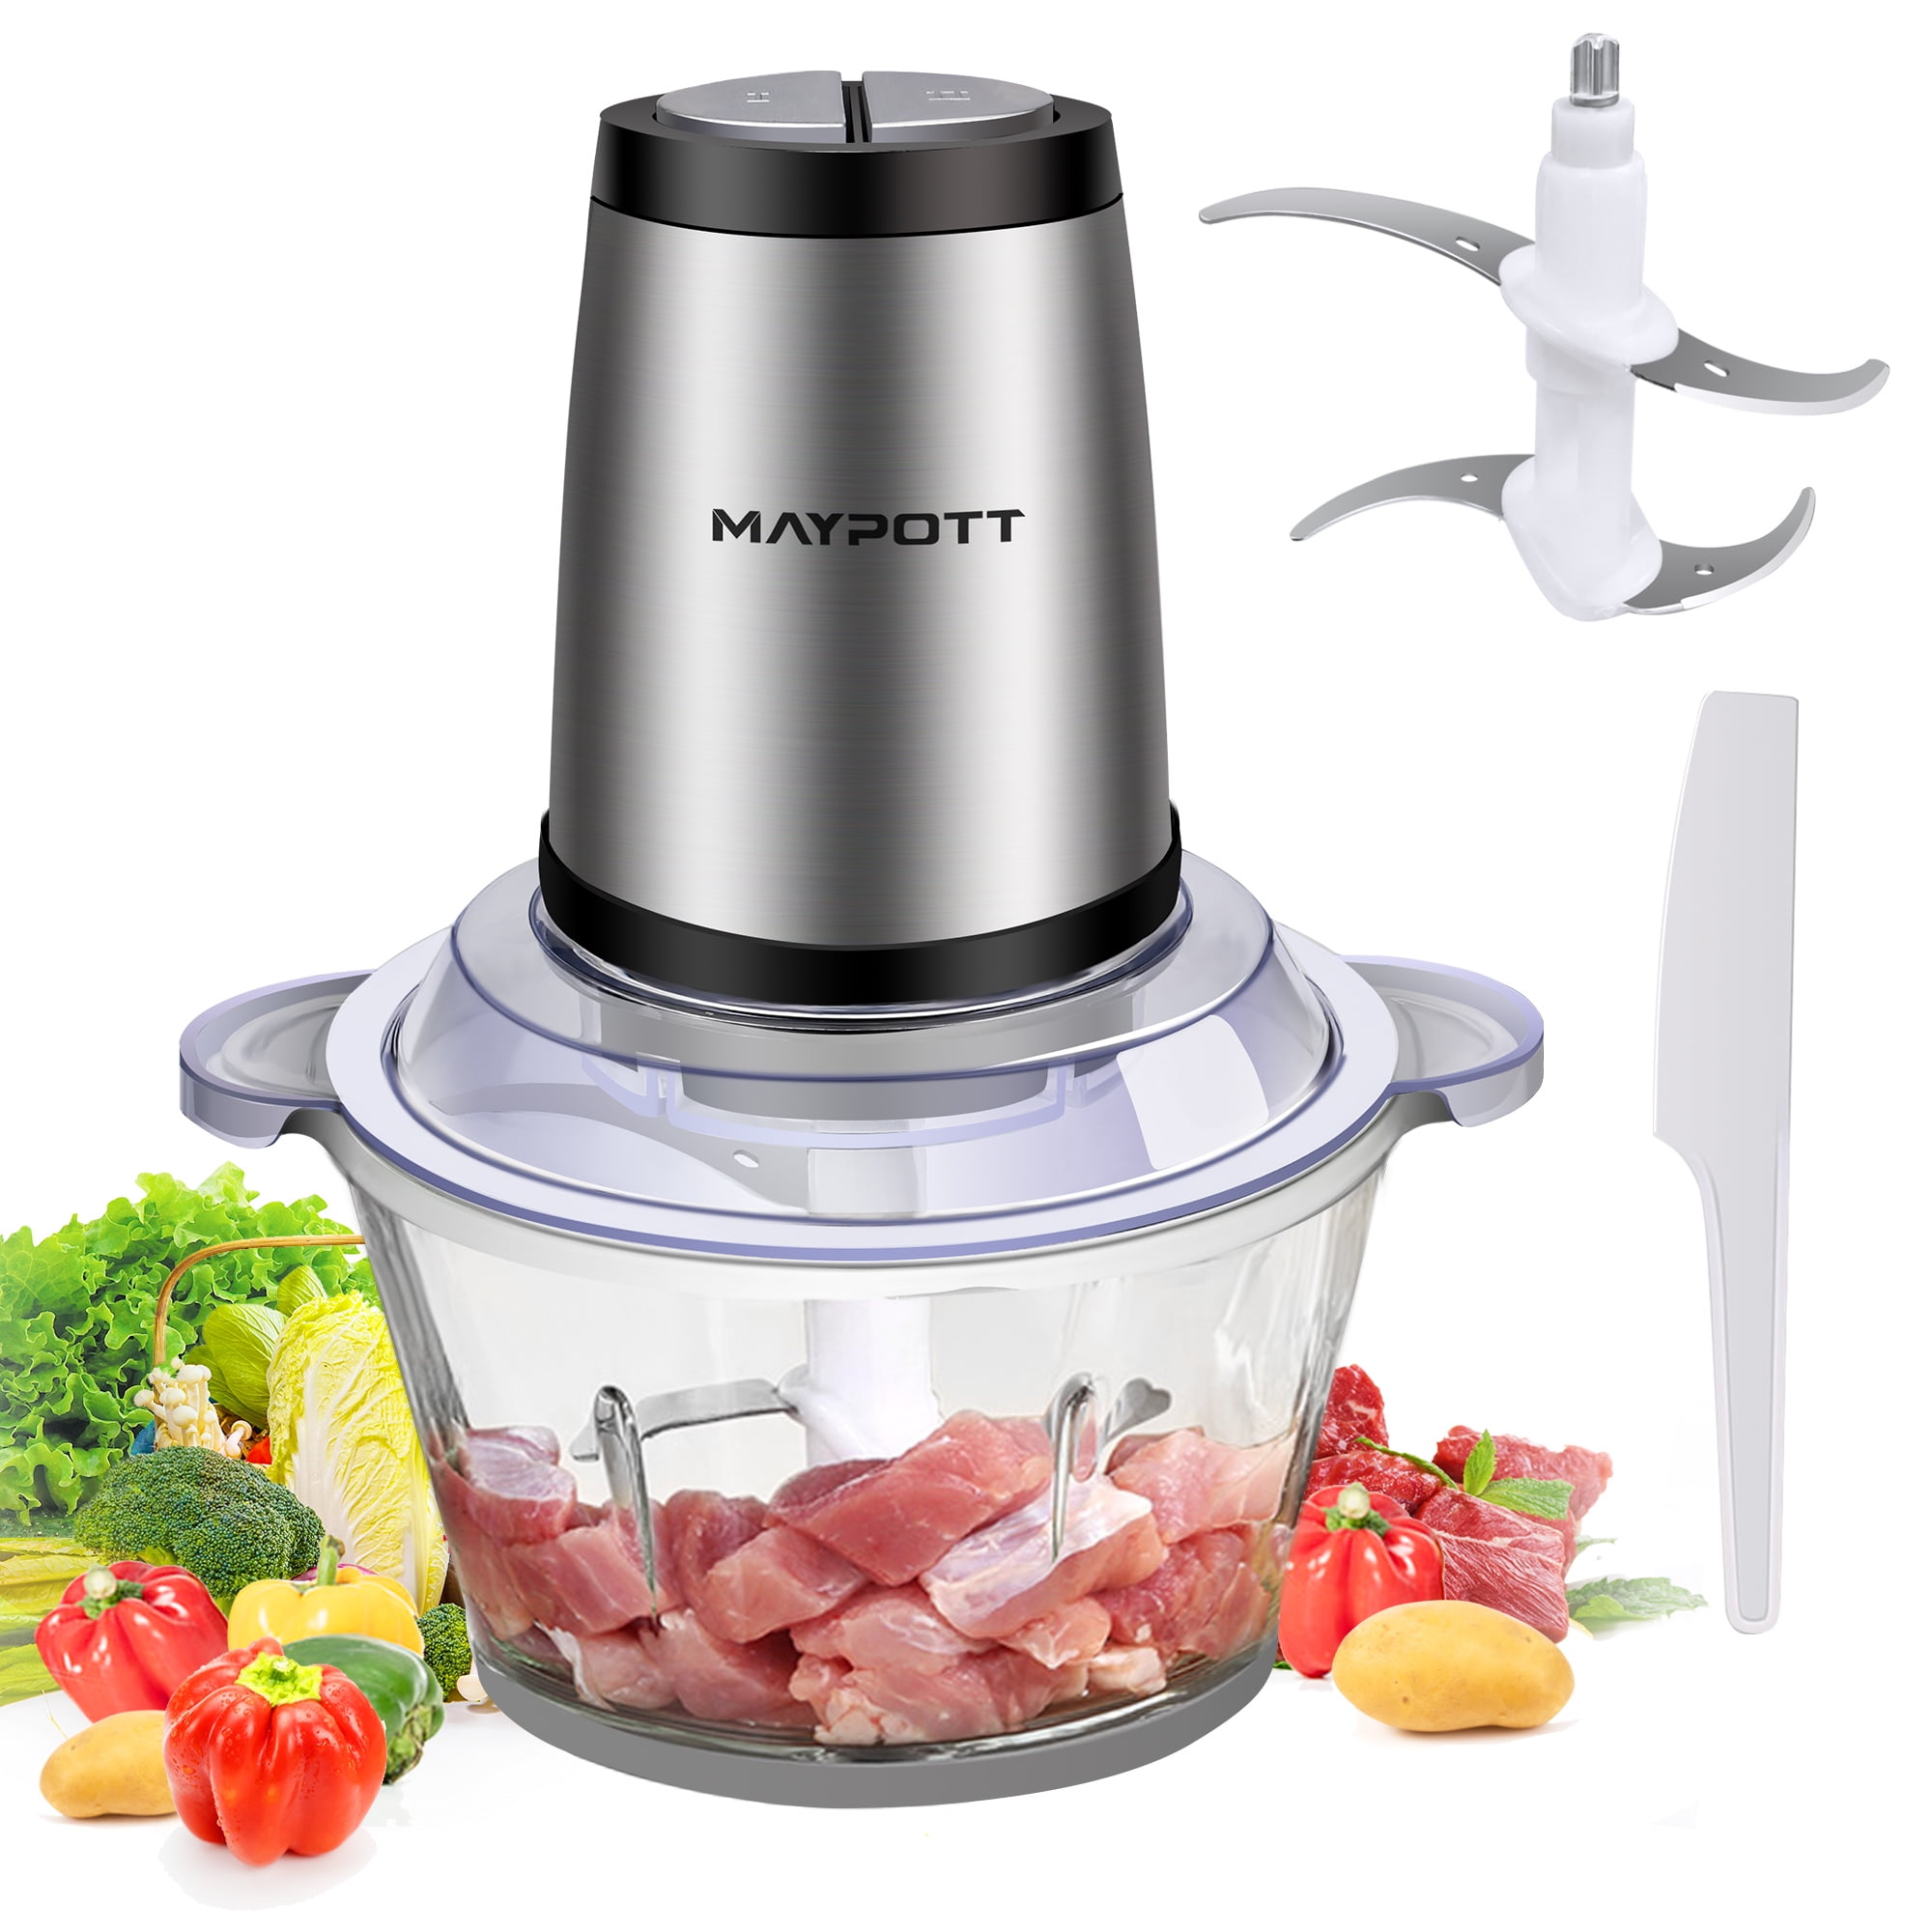 Mueller Electric Food Chopper, Mini Food Processor, 3-cup Mini Chopper,  Meat Grinder, Mix, Chop, Mince and Blend Vegetables, Fruits, Nuts, Meats,  Stainless Steel Blade, White - Yahoo Shopping